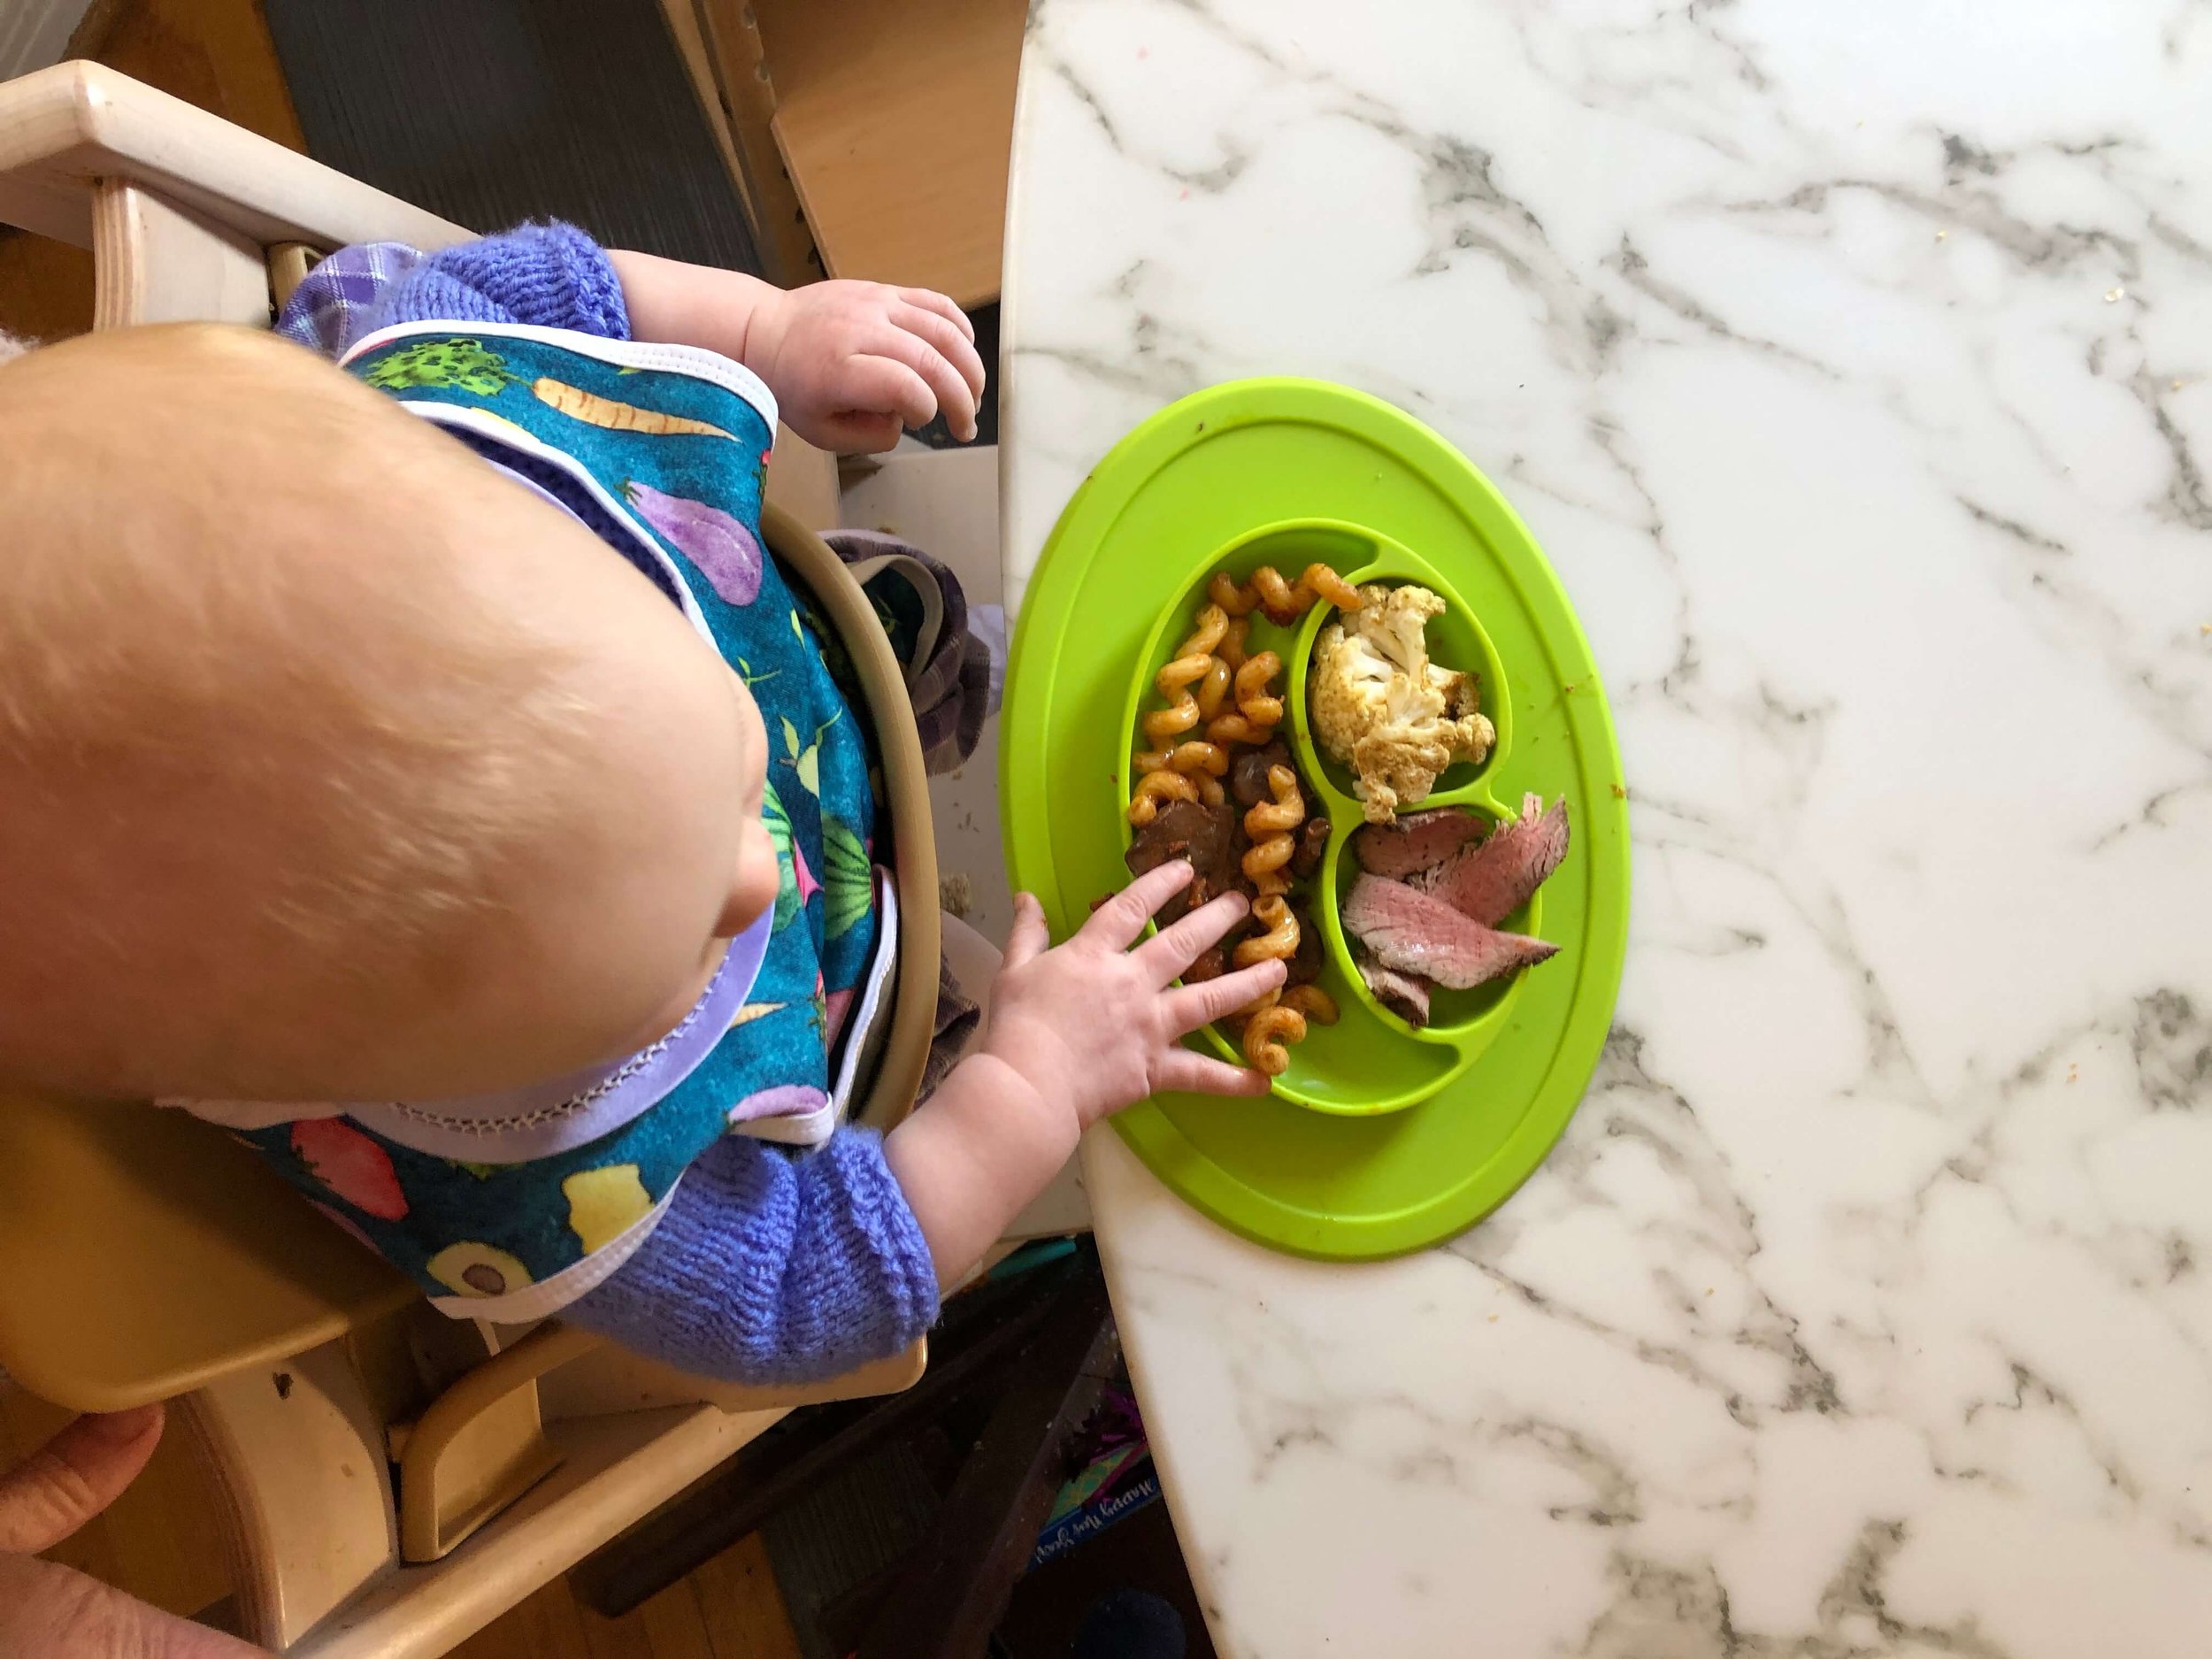 Baby Led Weaning (BLW) Starting Solids Program on Instagram: On January 3,  2021, three years ago, I set my New Year's Resolution to self-publish my  very own cookbook. I distinctly remember designing